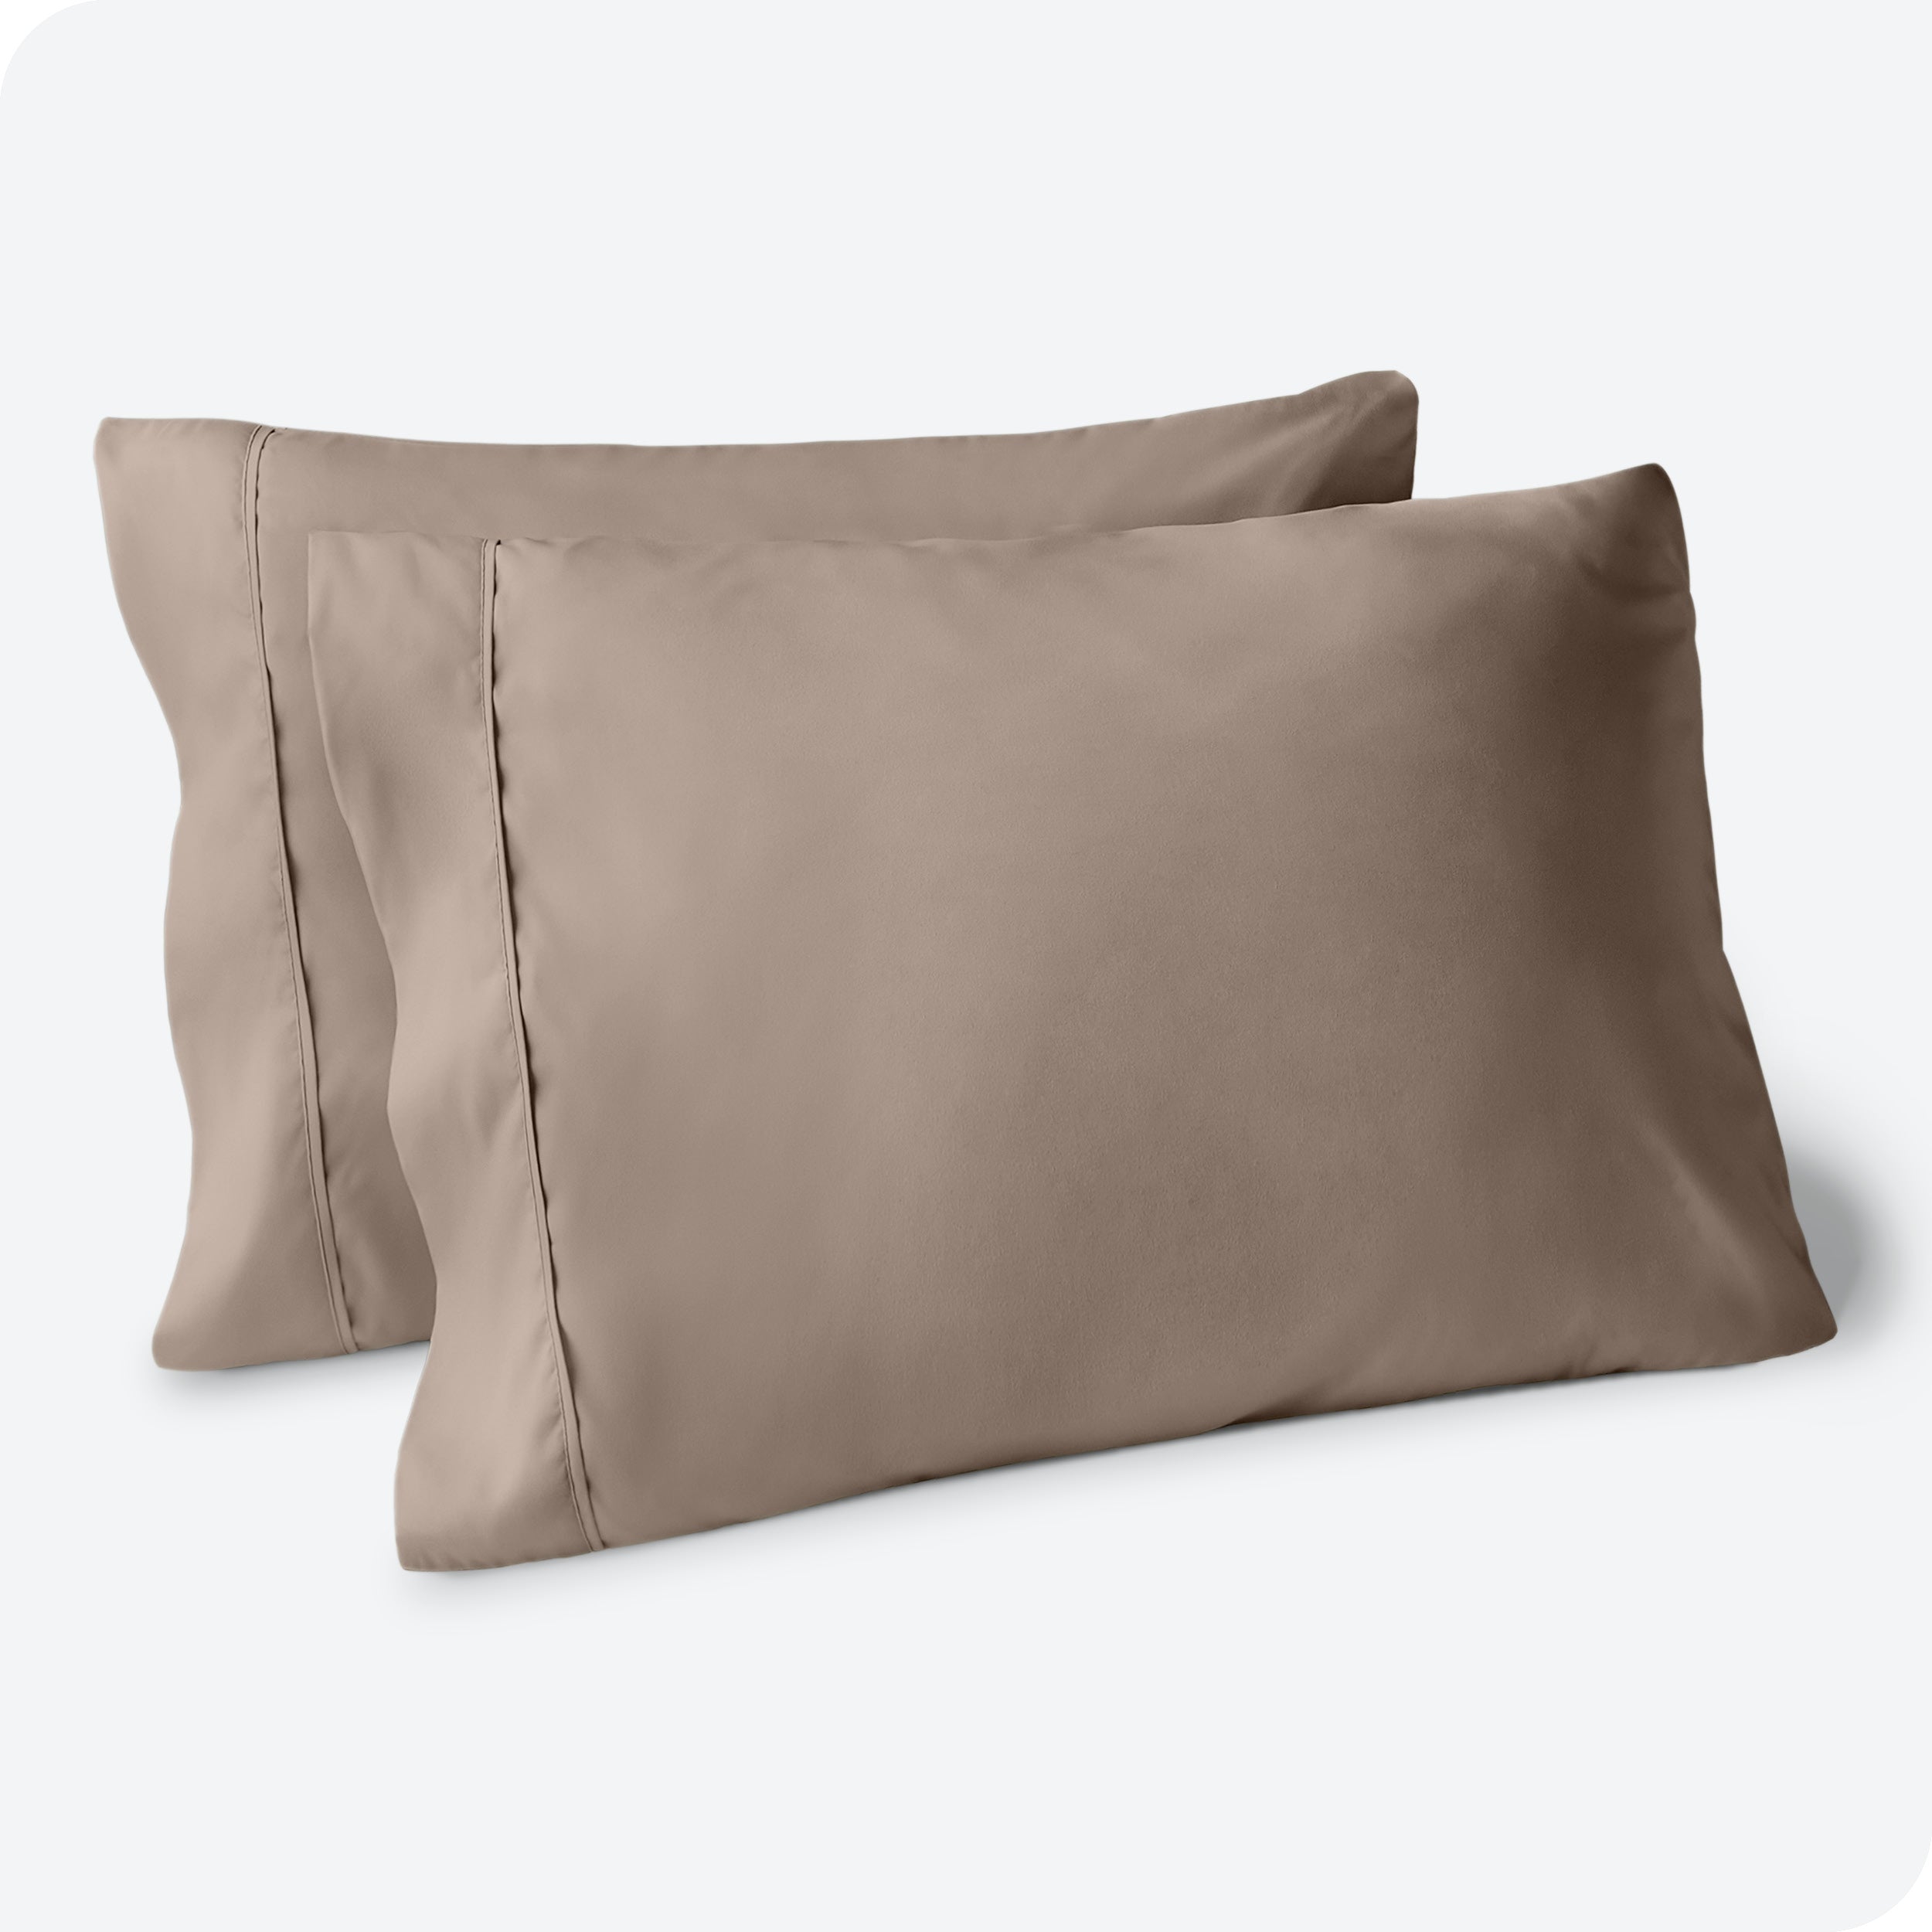 Two pillows on a white background with taupe pillowcases on them